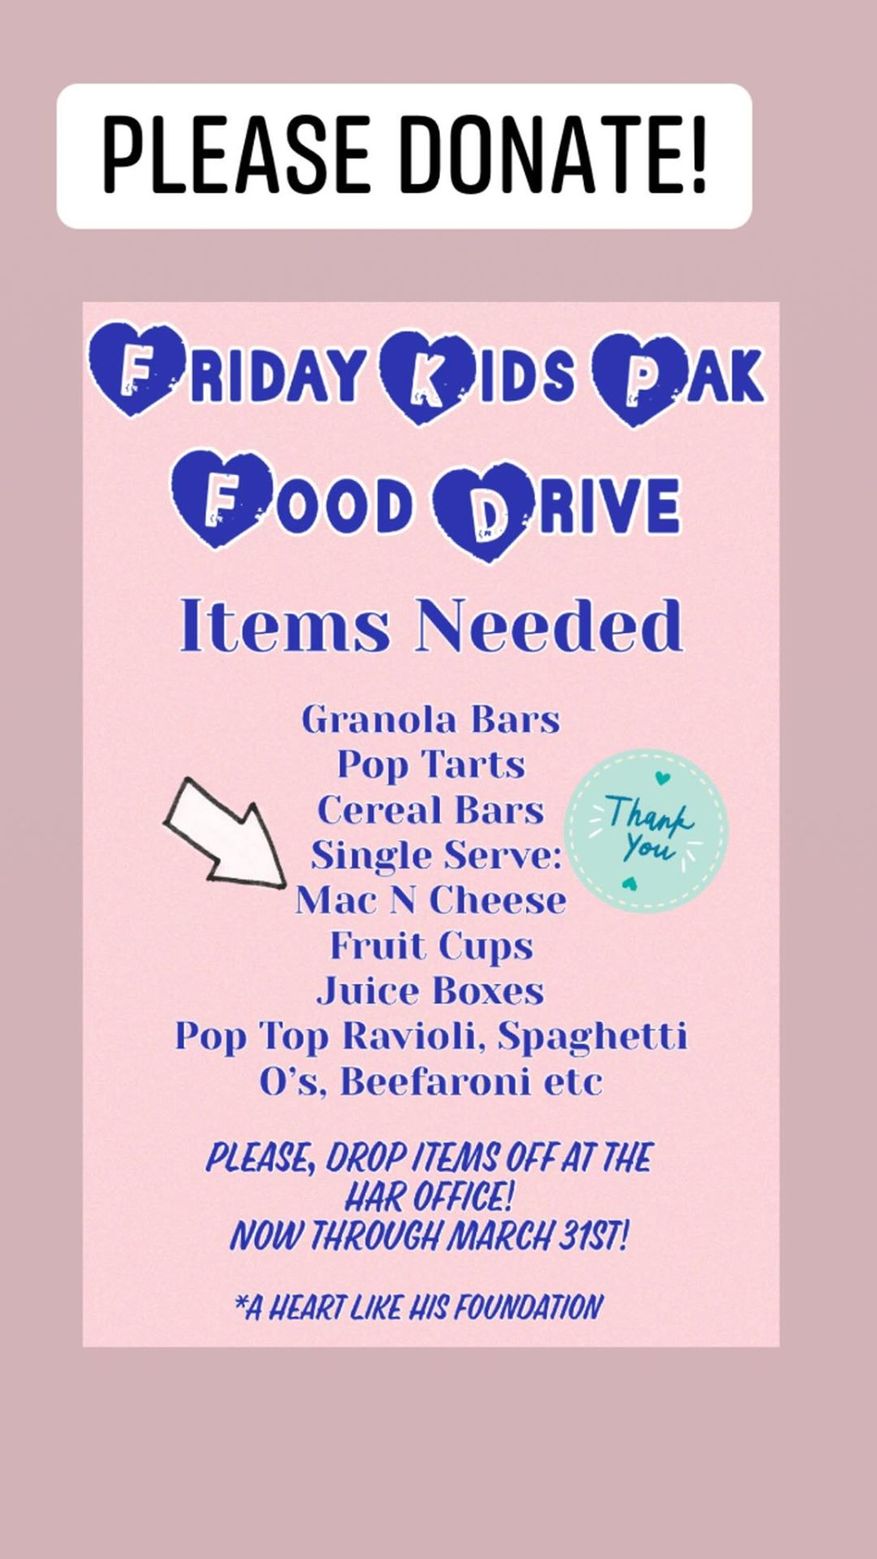 Ongoing Kids Food Drive for weekend food